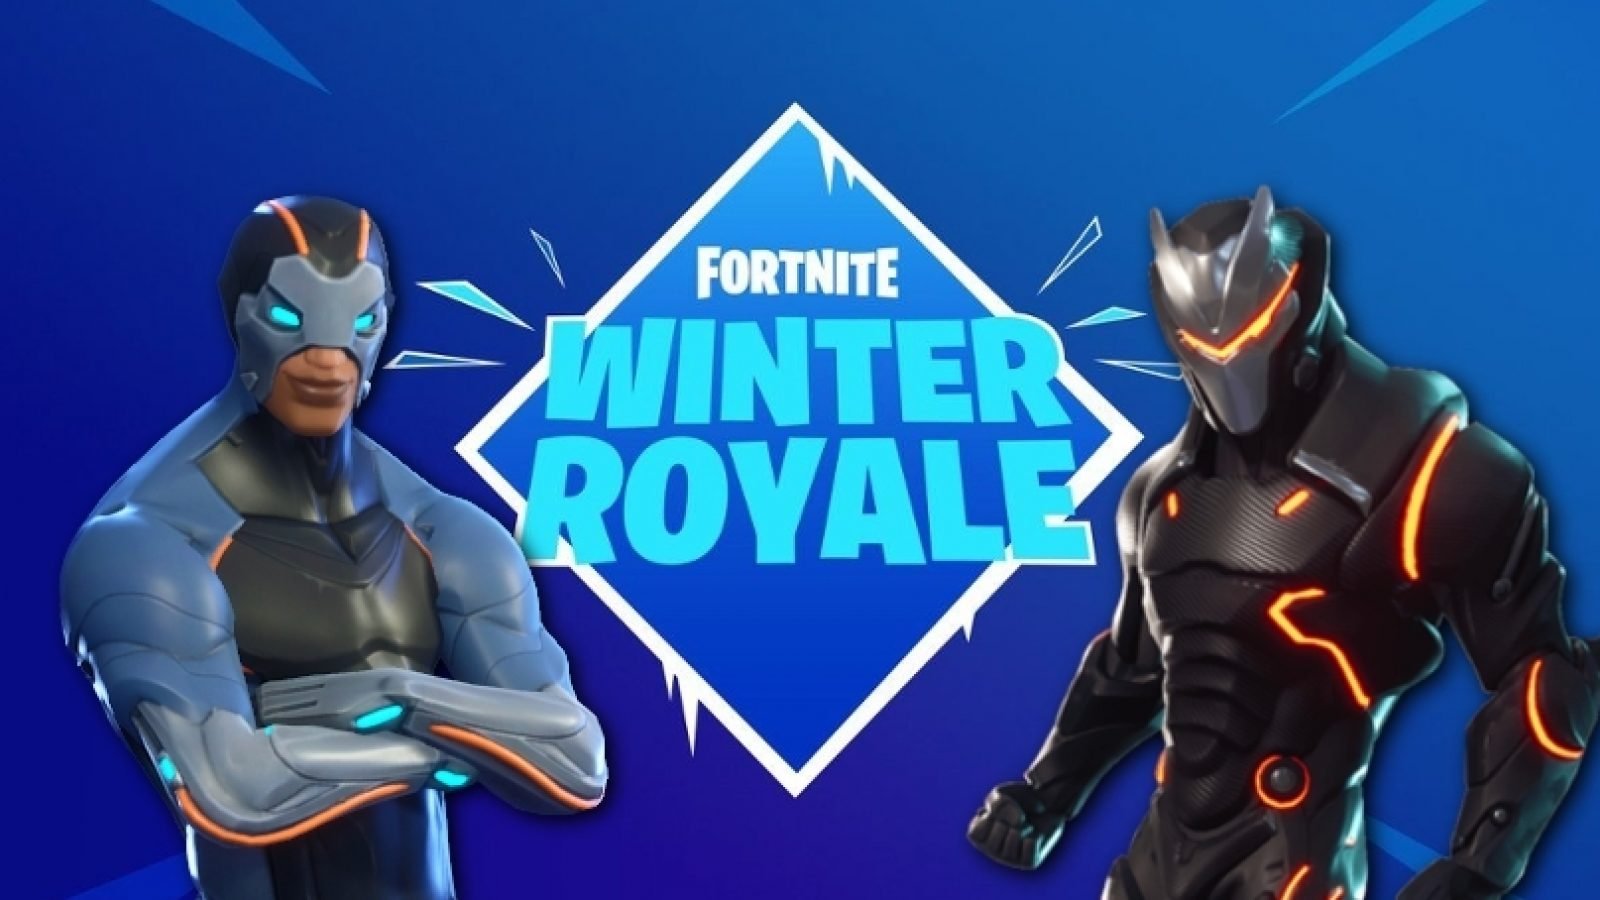 Two Fortnite Players Qualified For Winter Royale Finals In Both Regions